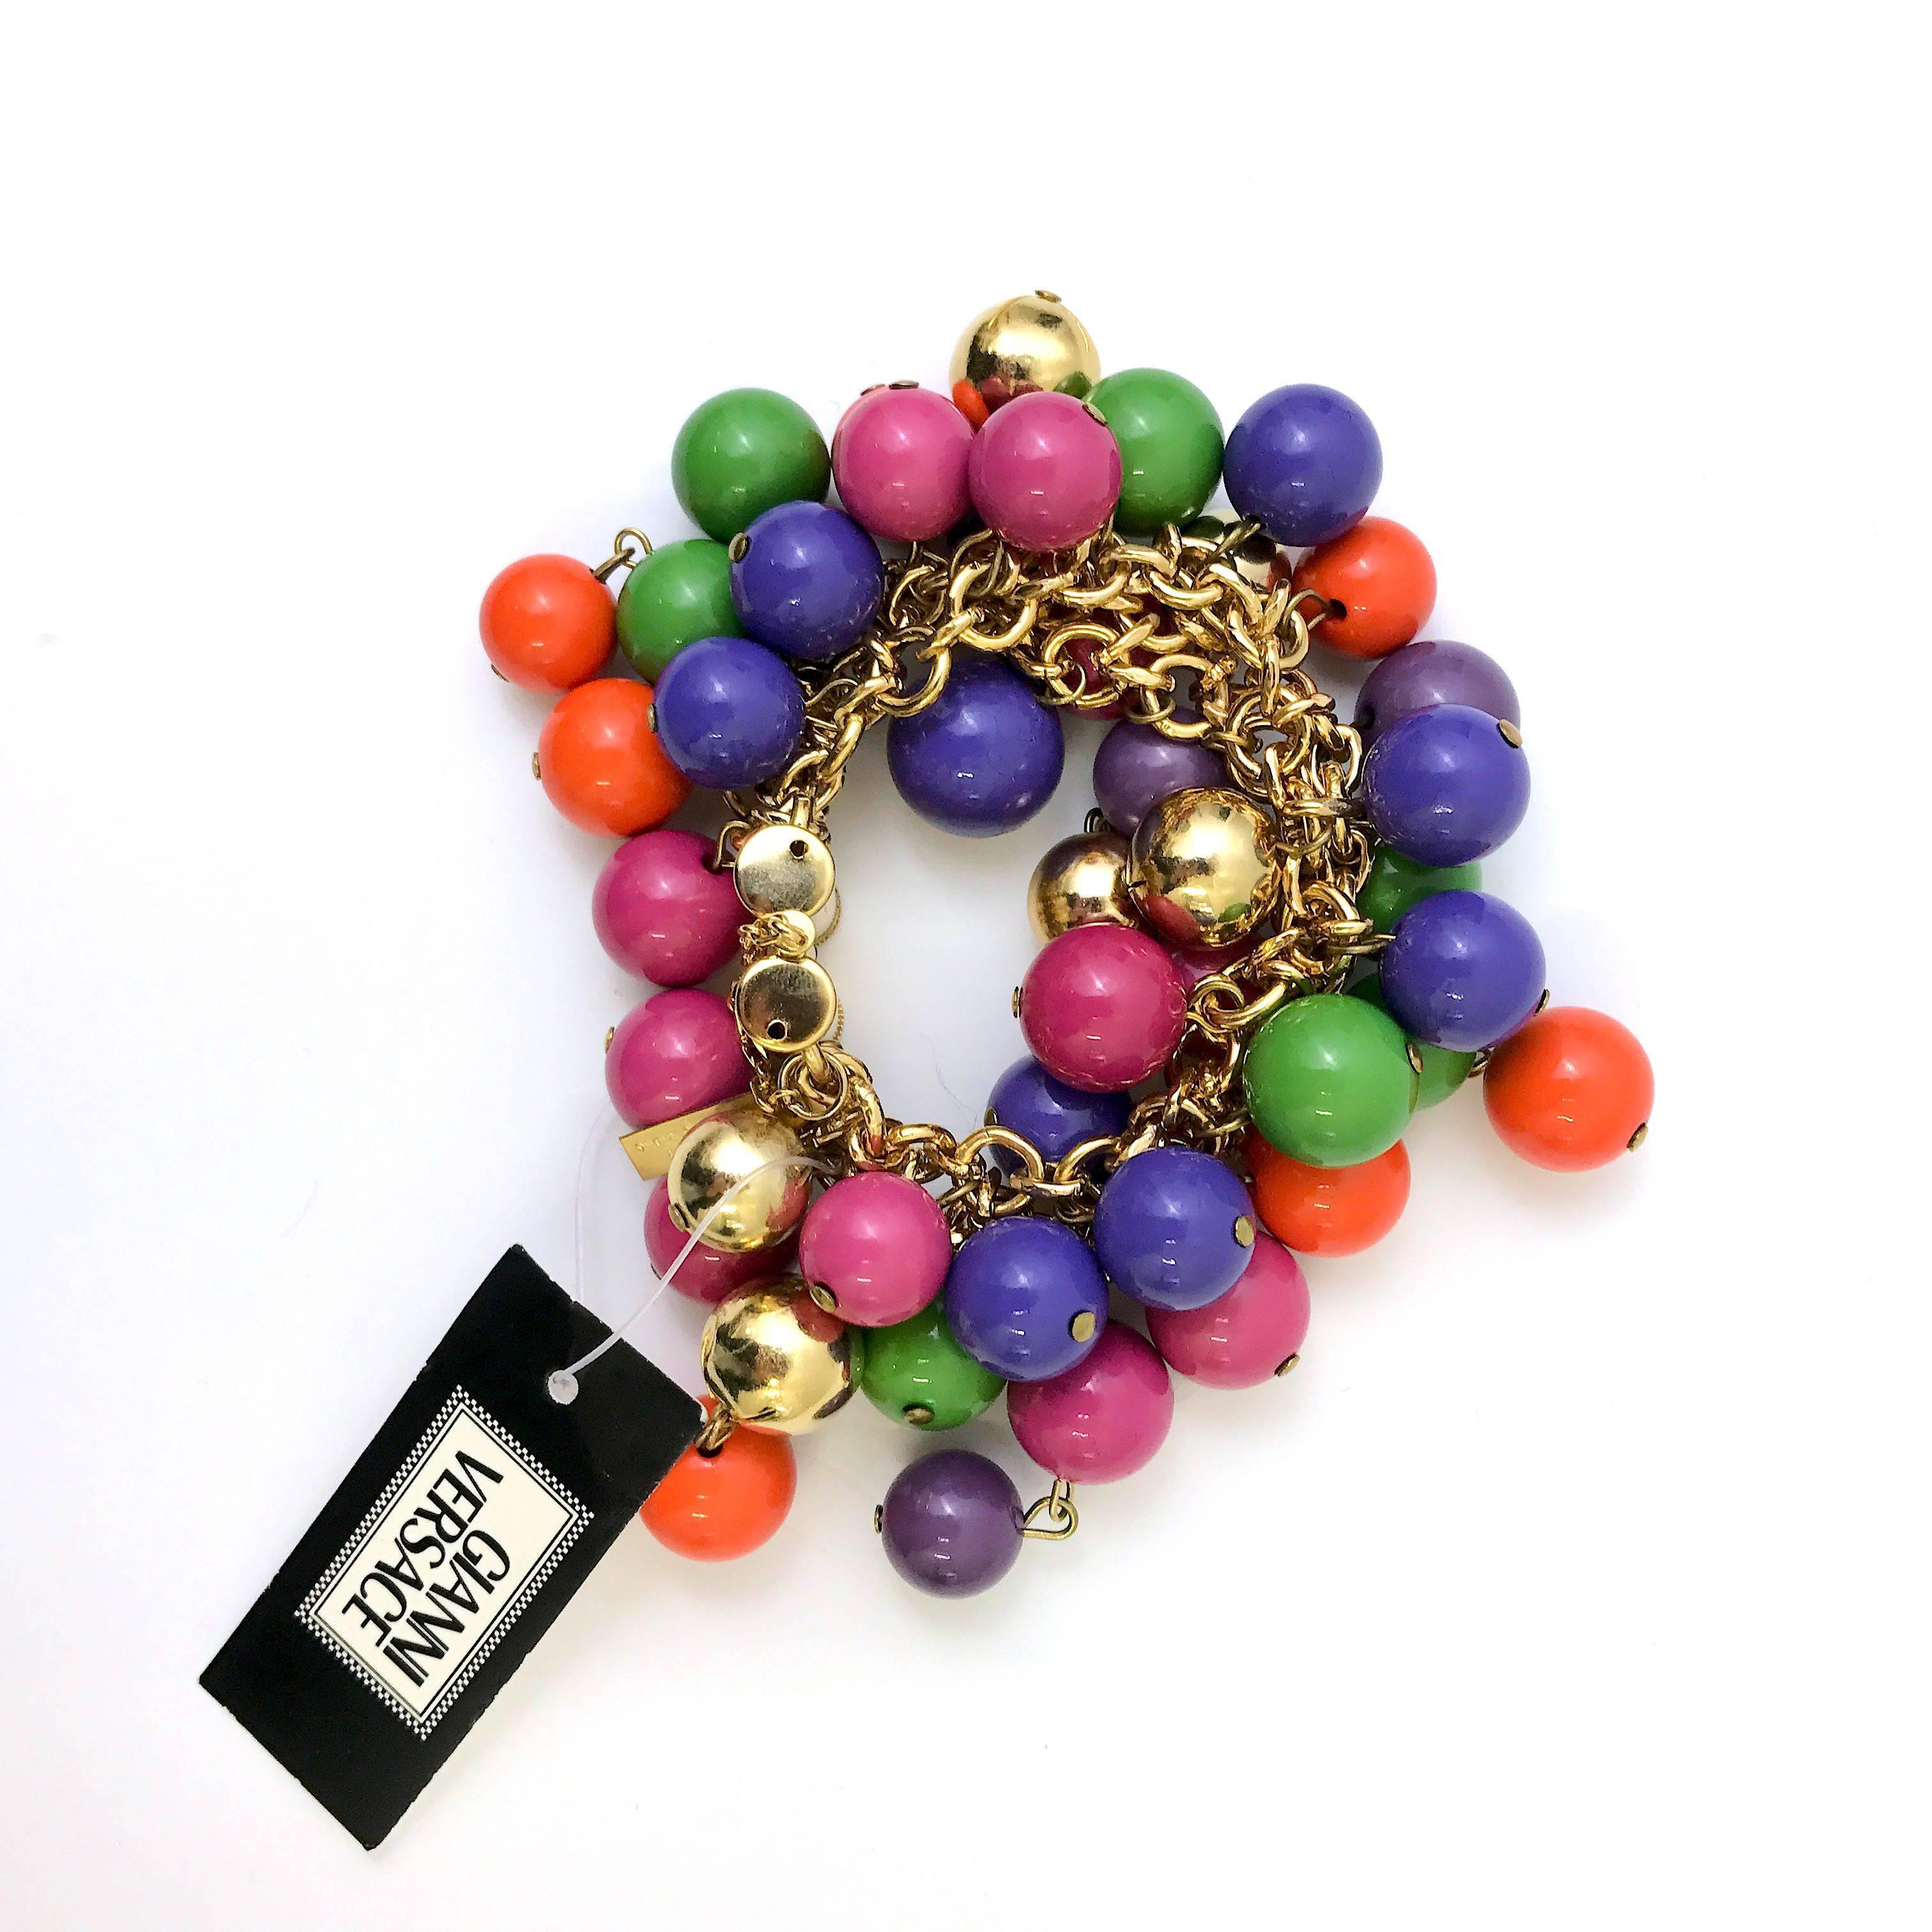 This bracelet by Gianni Versace is very rare with it's multicoloured cluster beaded design. It definitely is a collectors item for any Gianni Versace enthusiast. Features multi-bright colored round beads,which hang from a gilded gold tone metal